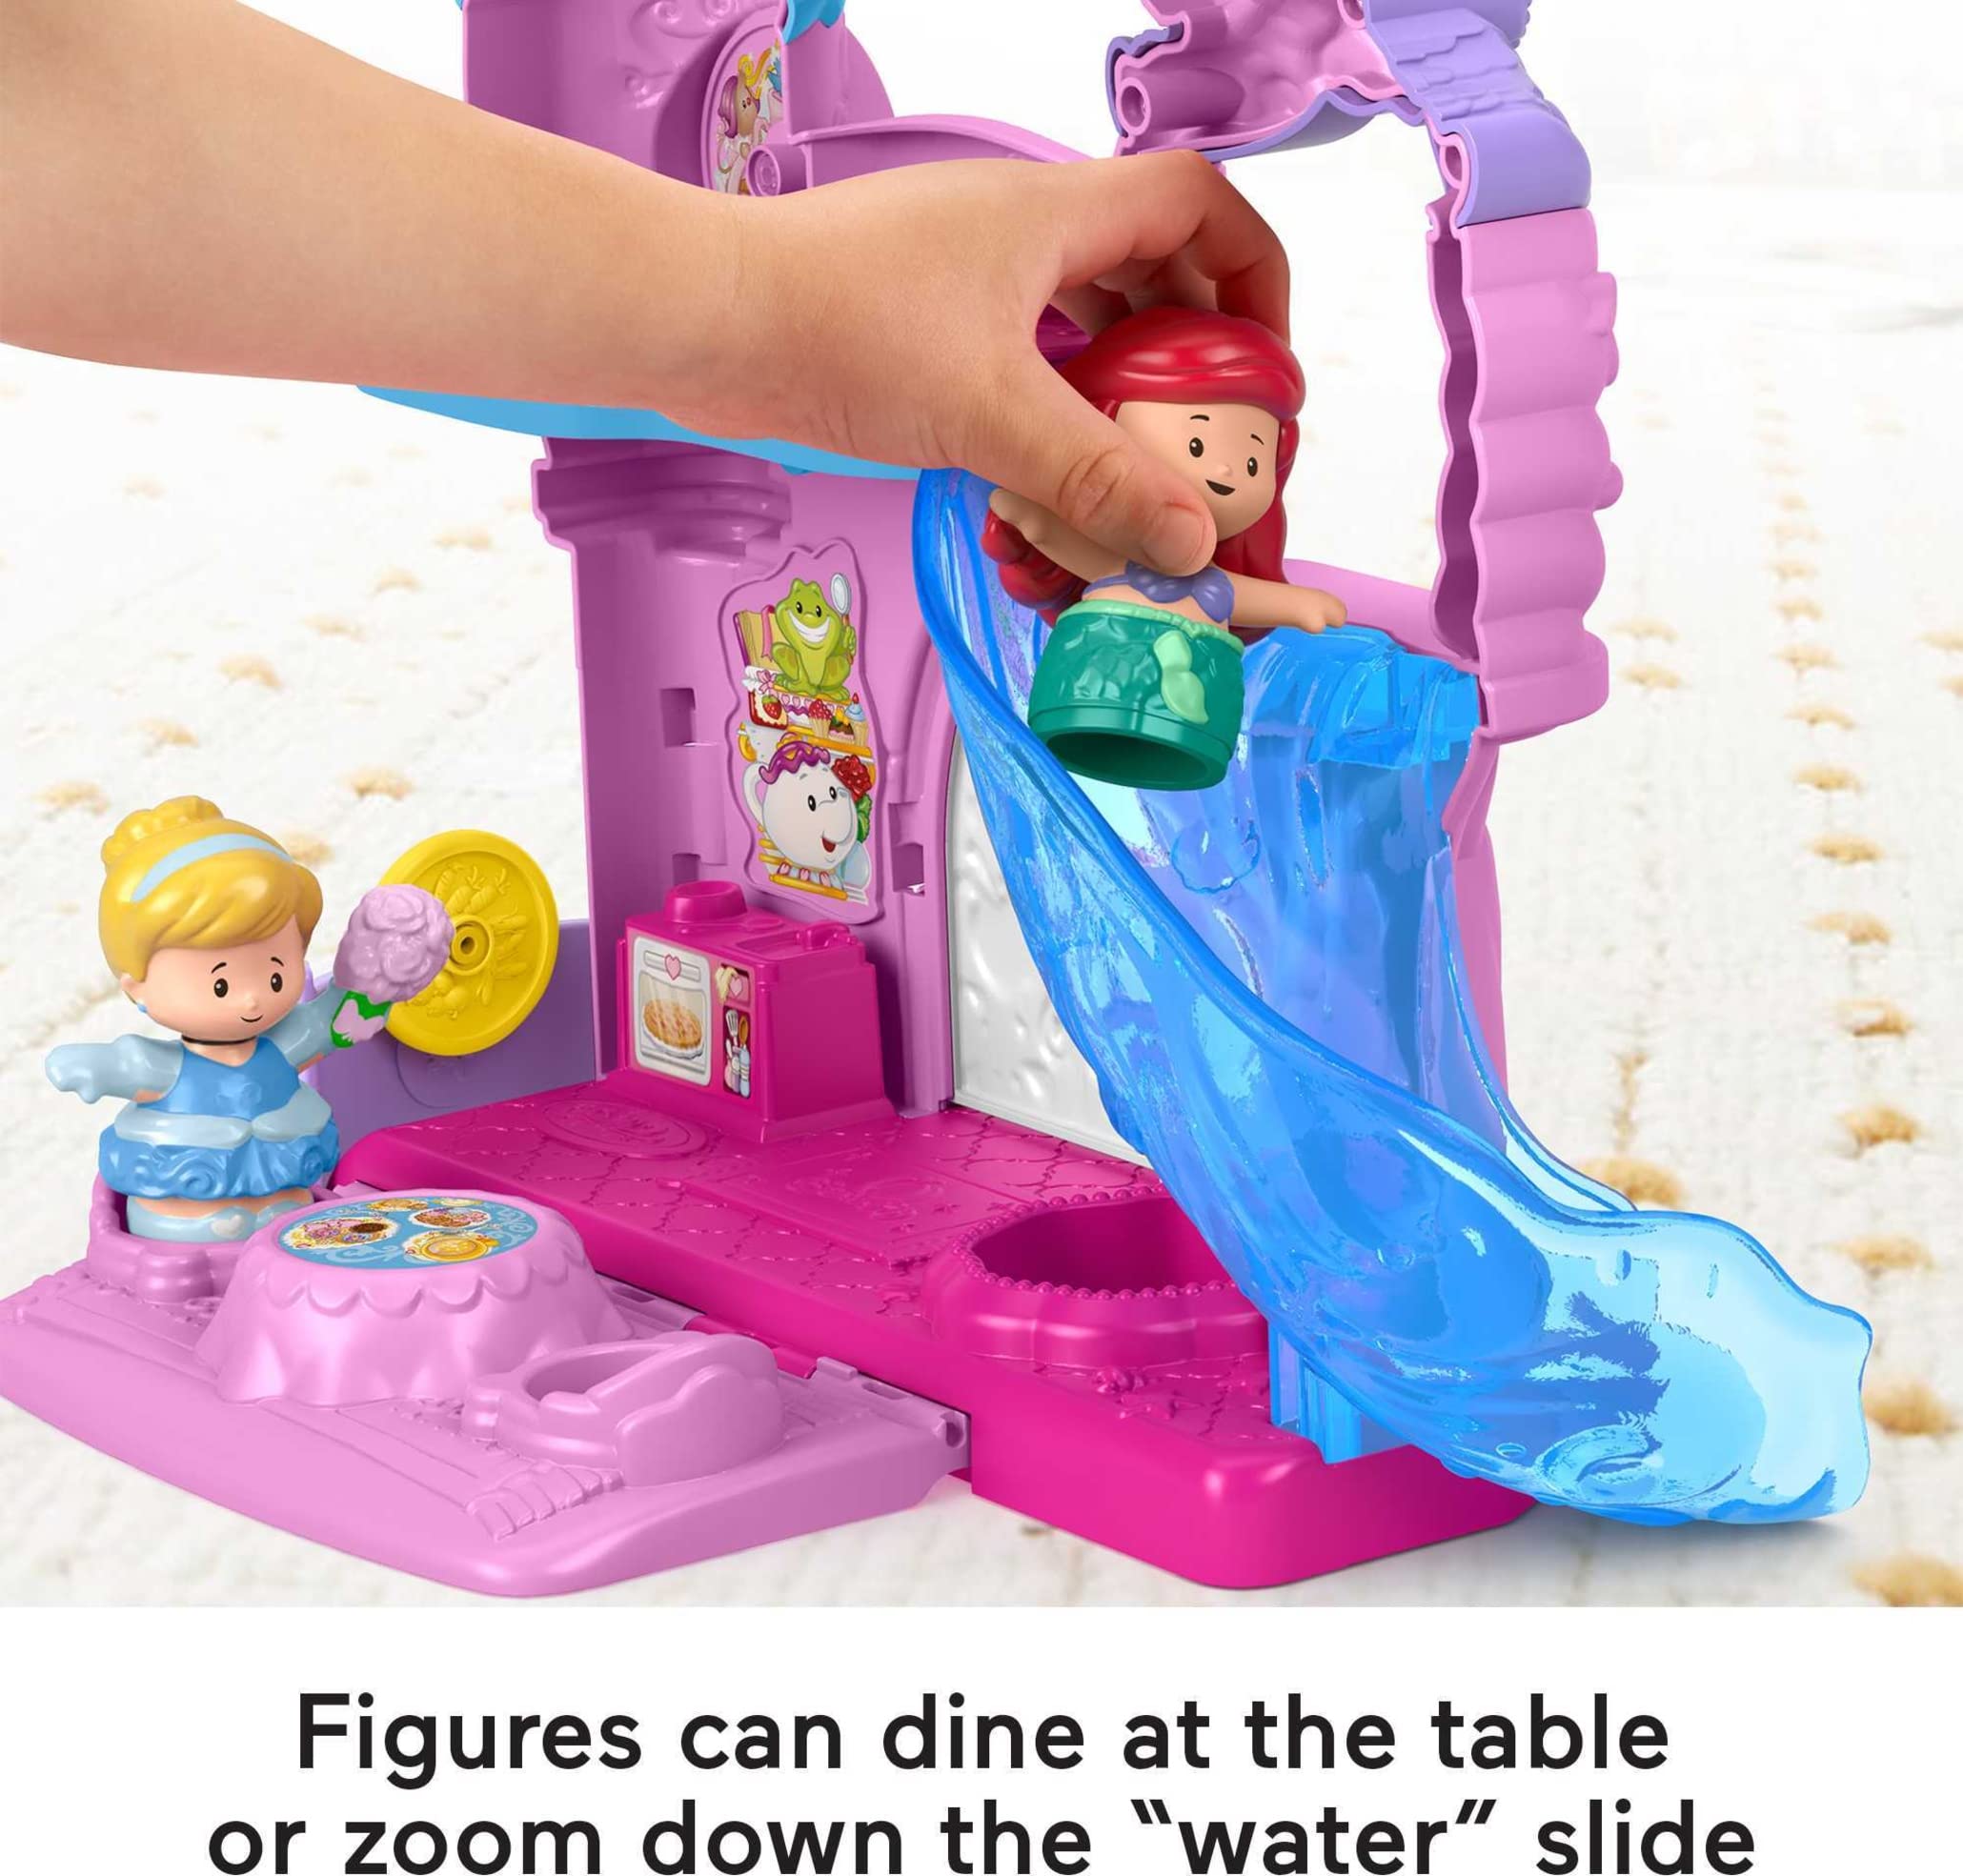 Disney Princess Little People Play & Go Castle Portable Playset with Ariel & Cinderella Figures for Ages 18+ Months + 6 Character Figures for Pretend Play Ages 18+ Months [Amazon Exclusive]